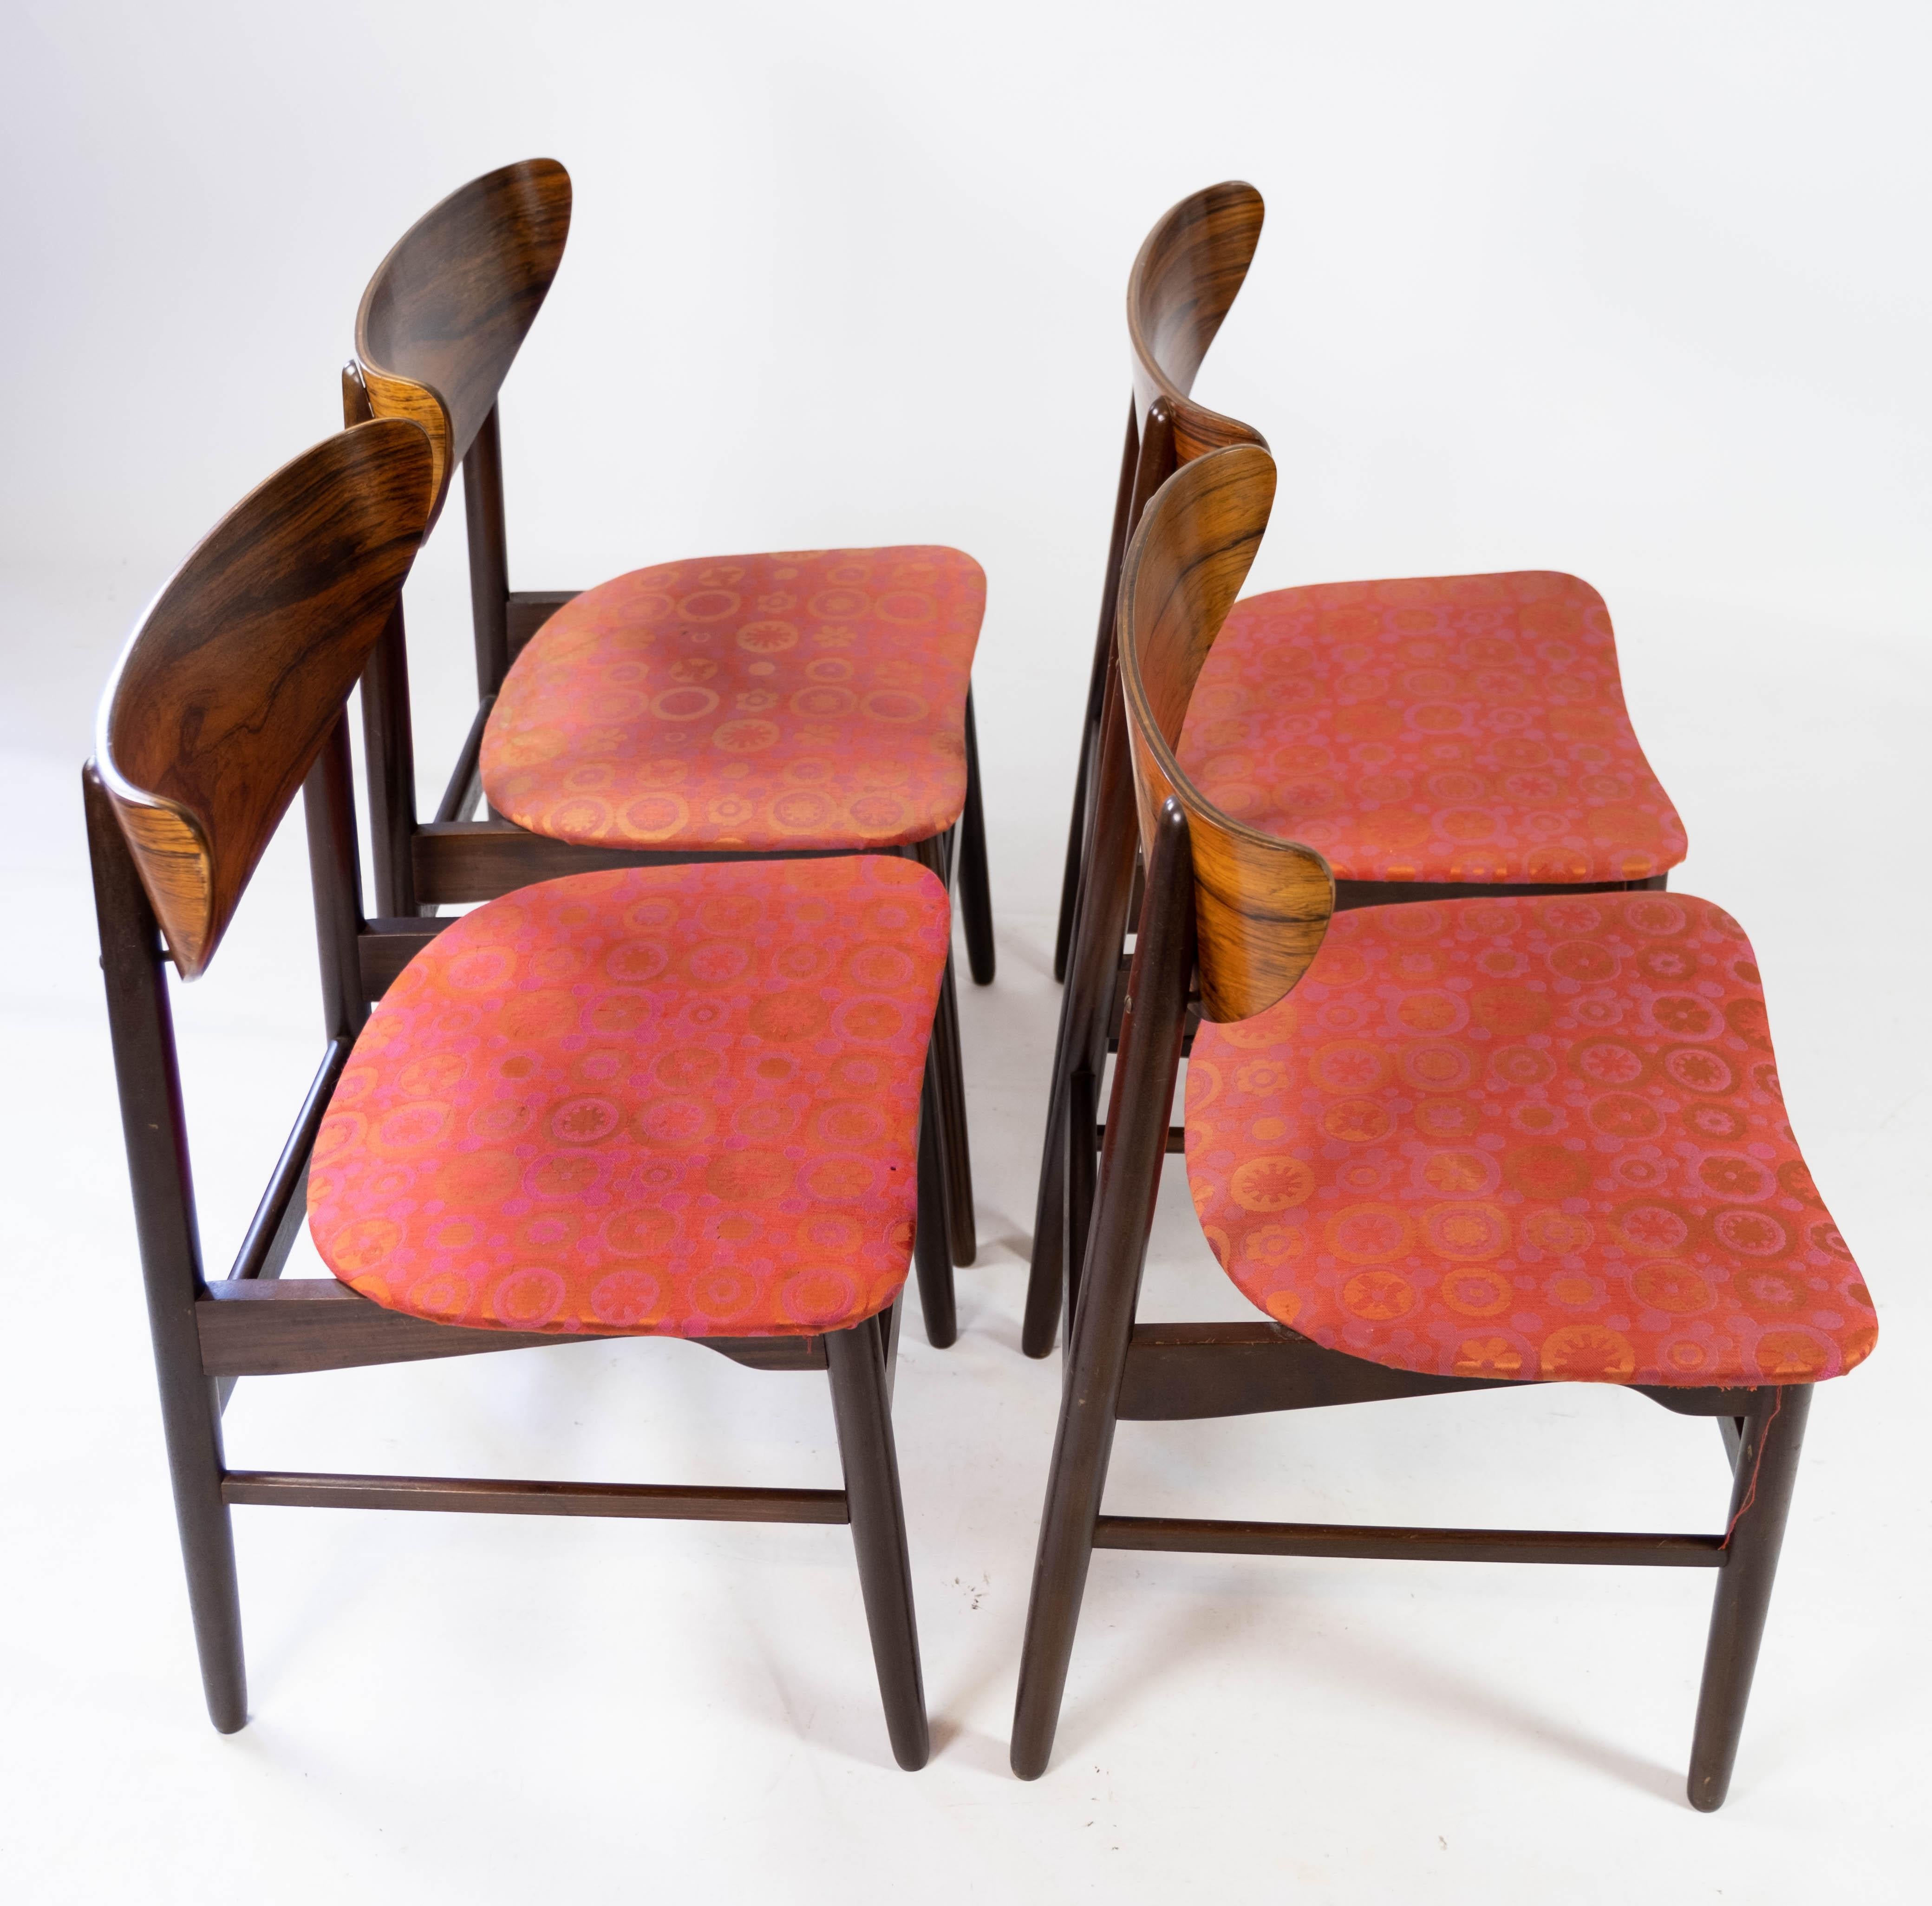 Fabric Set of Four Dining Room Chairs in Rosewood, of Danish Design, 1960s For Sale